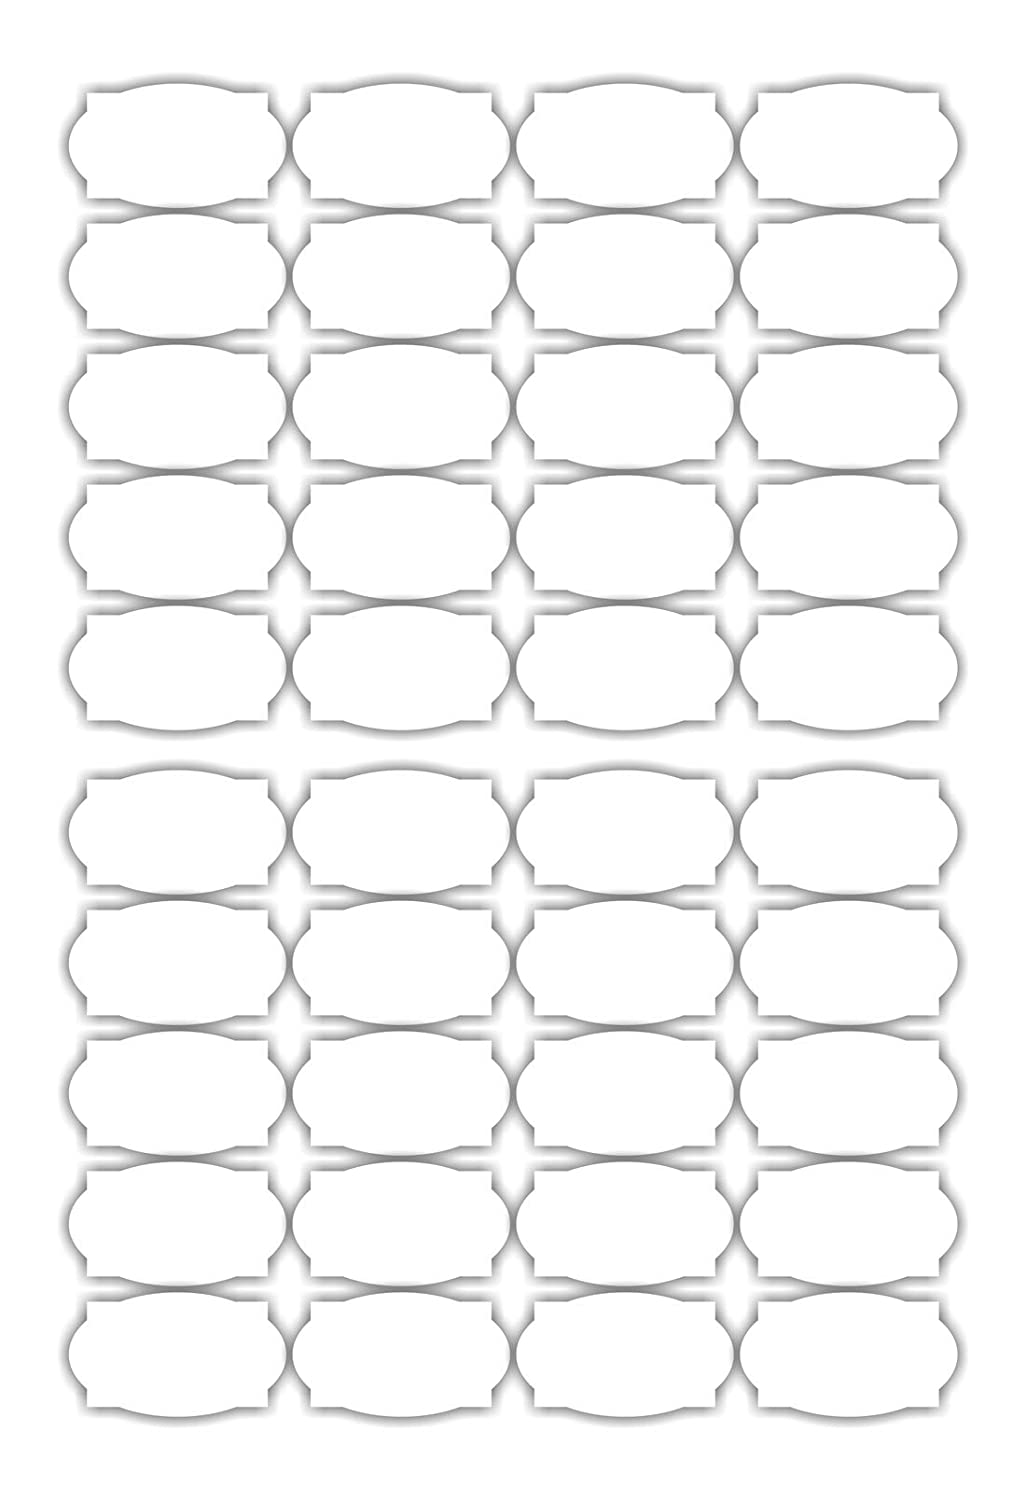 iberry's 108 pieces Waterproof Vinyl Stickers for Mason Jars Glass Bottle, Decals Craft, Kitchen Jar (Paper, 7 cm x 4 cm, White, 108 Piece) (Rectangle & Oval stickers curly) (4)